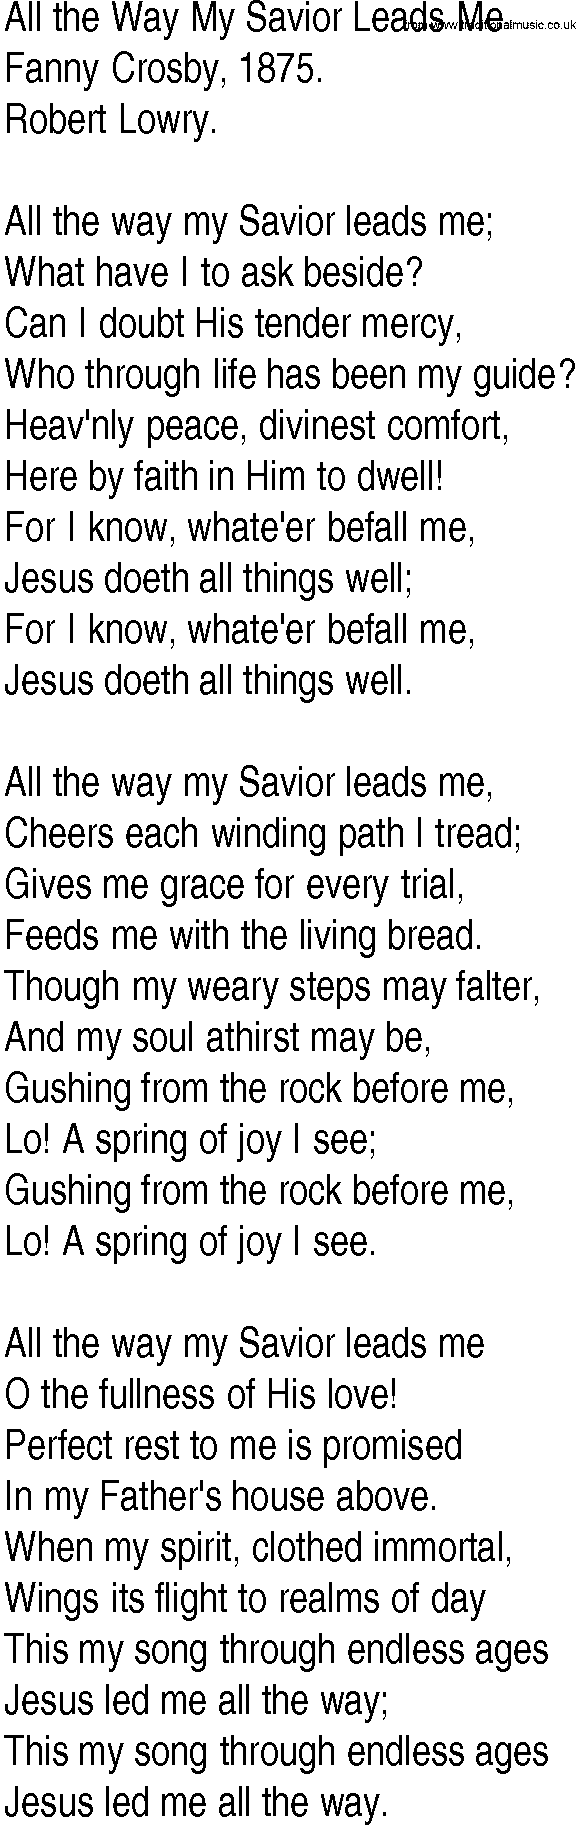 Hymn and Gospel Song: All the Way My Savior Leads Me by Fanny Crosby lyrics